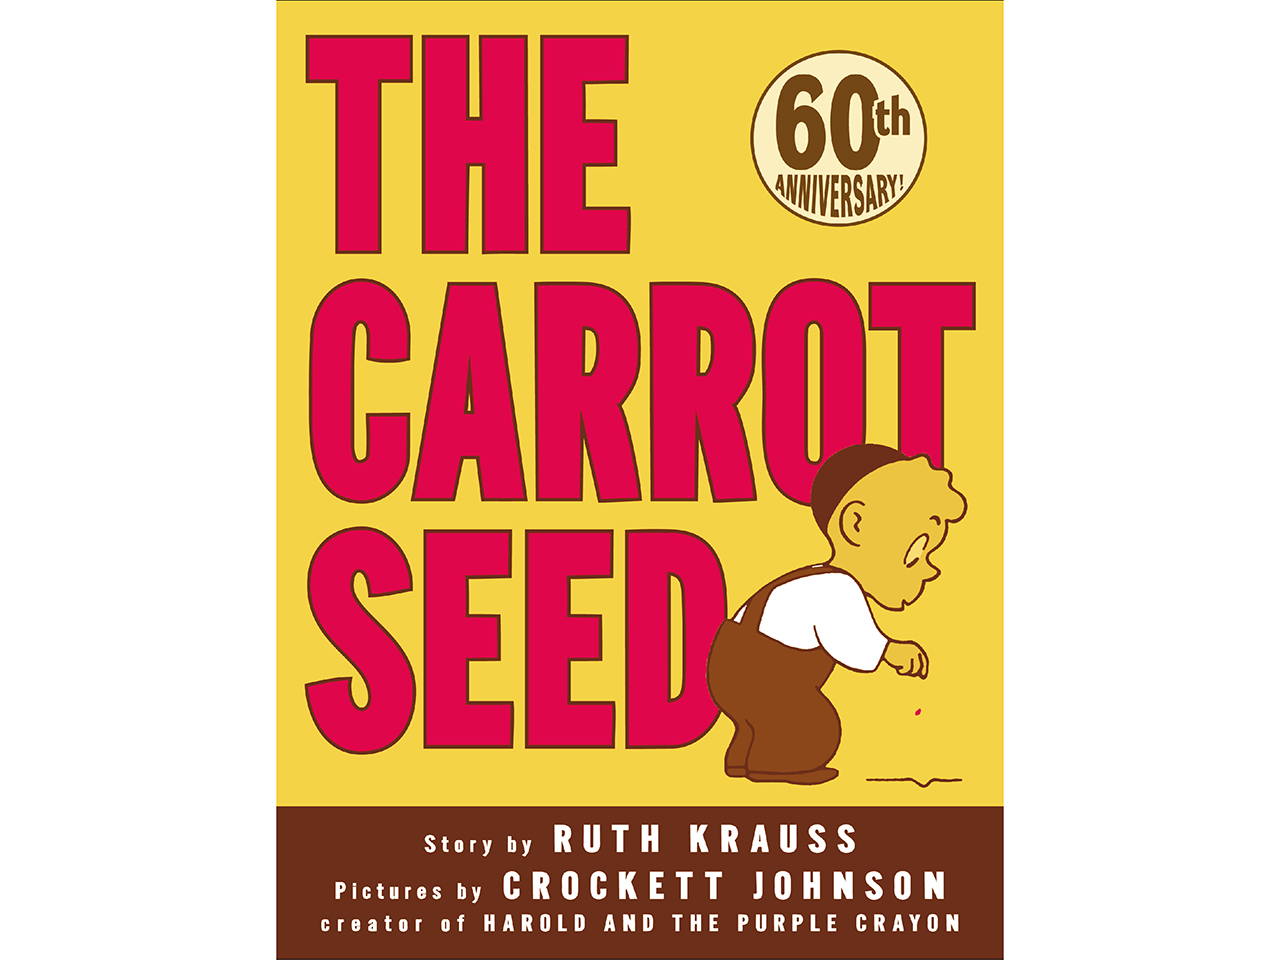 The Carrot Seed book cover